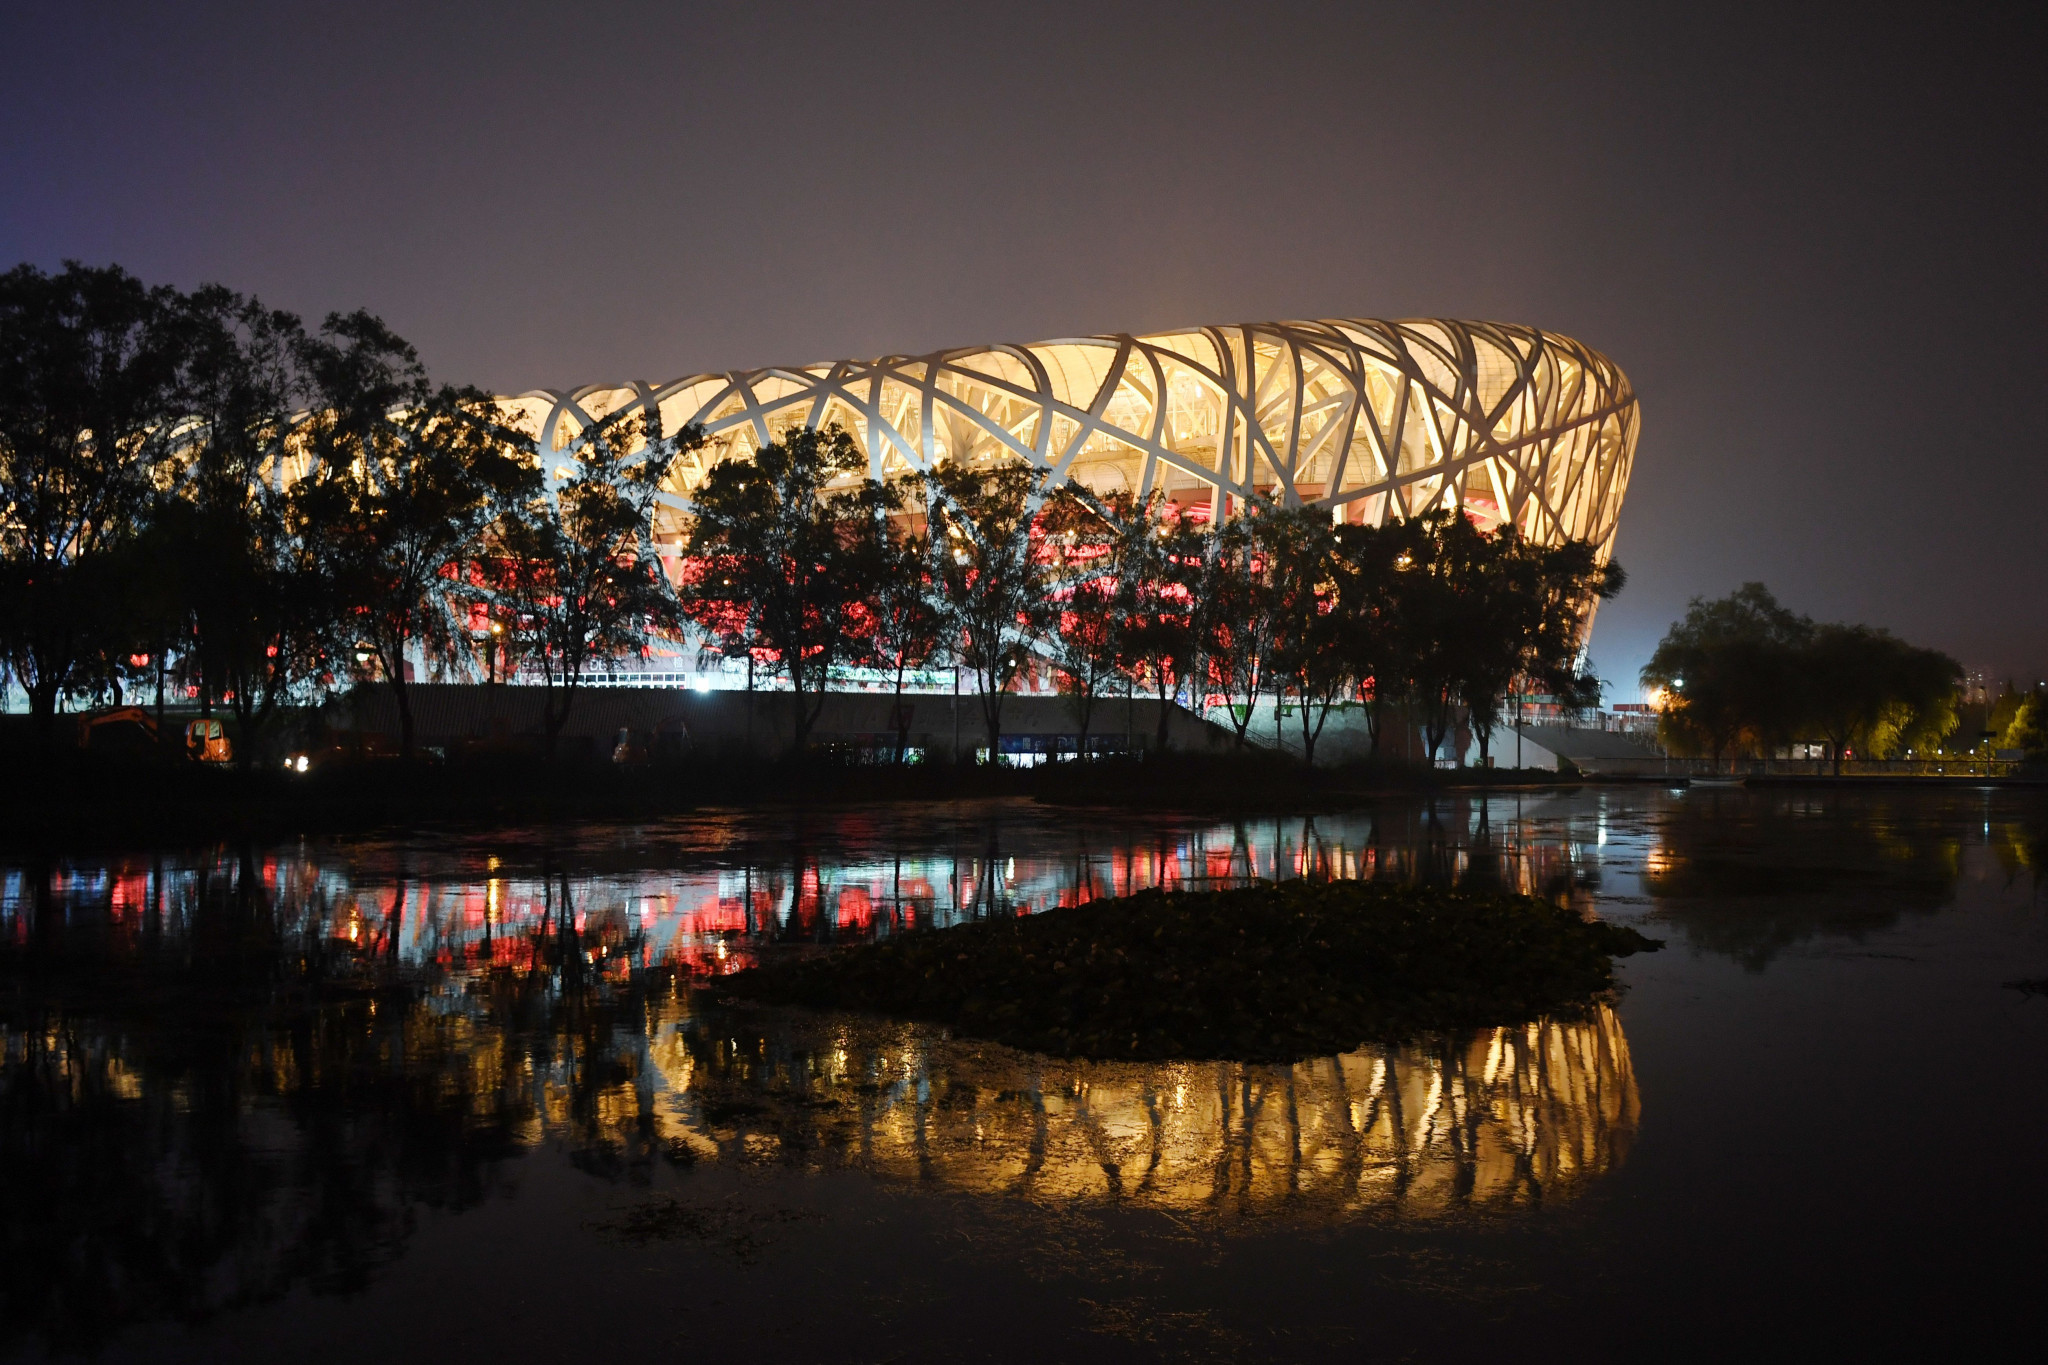 Representatives from the world's leading news agencies visited facilities for Beijing 2020 such as the National Stadium ©Getty Images